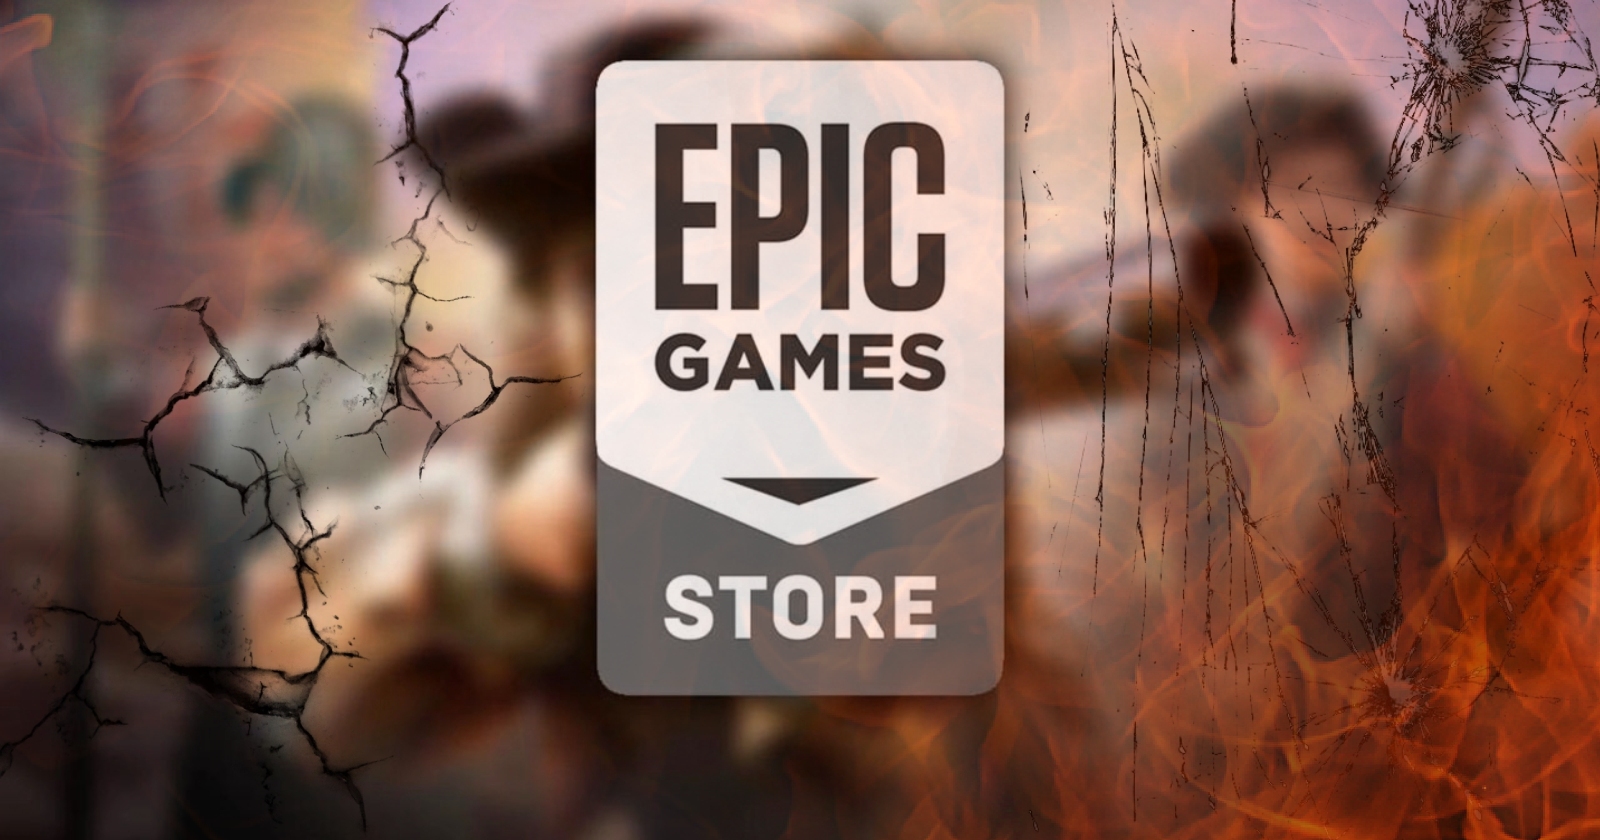 Epic Games is giving away the beloved online game for free!